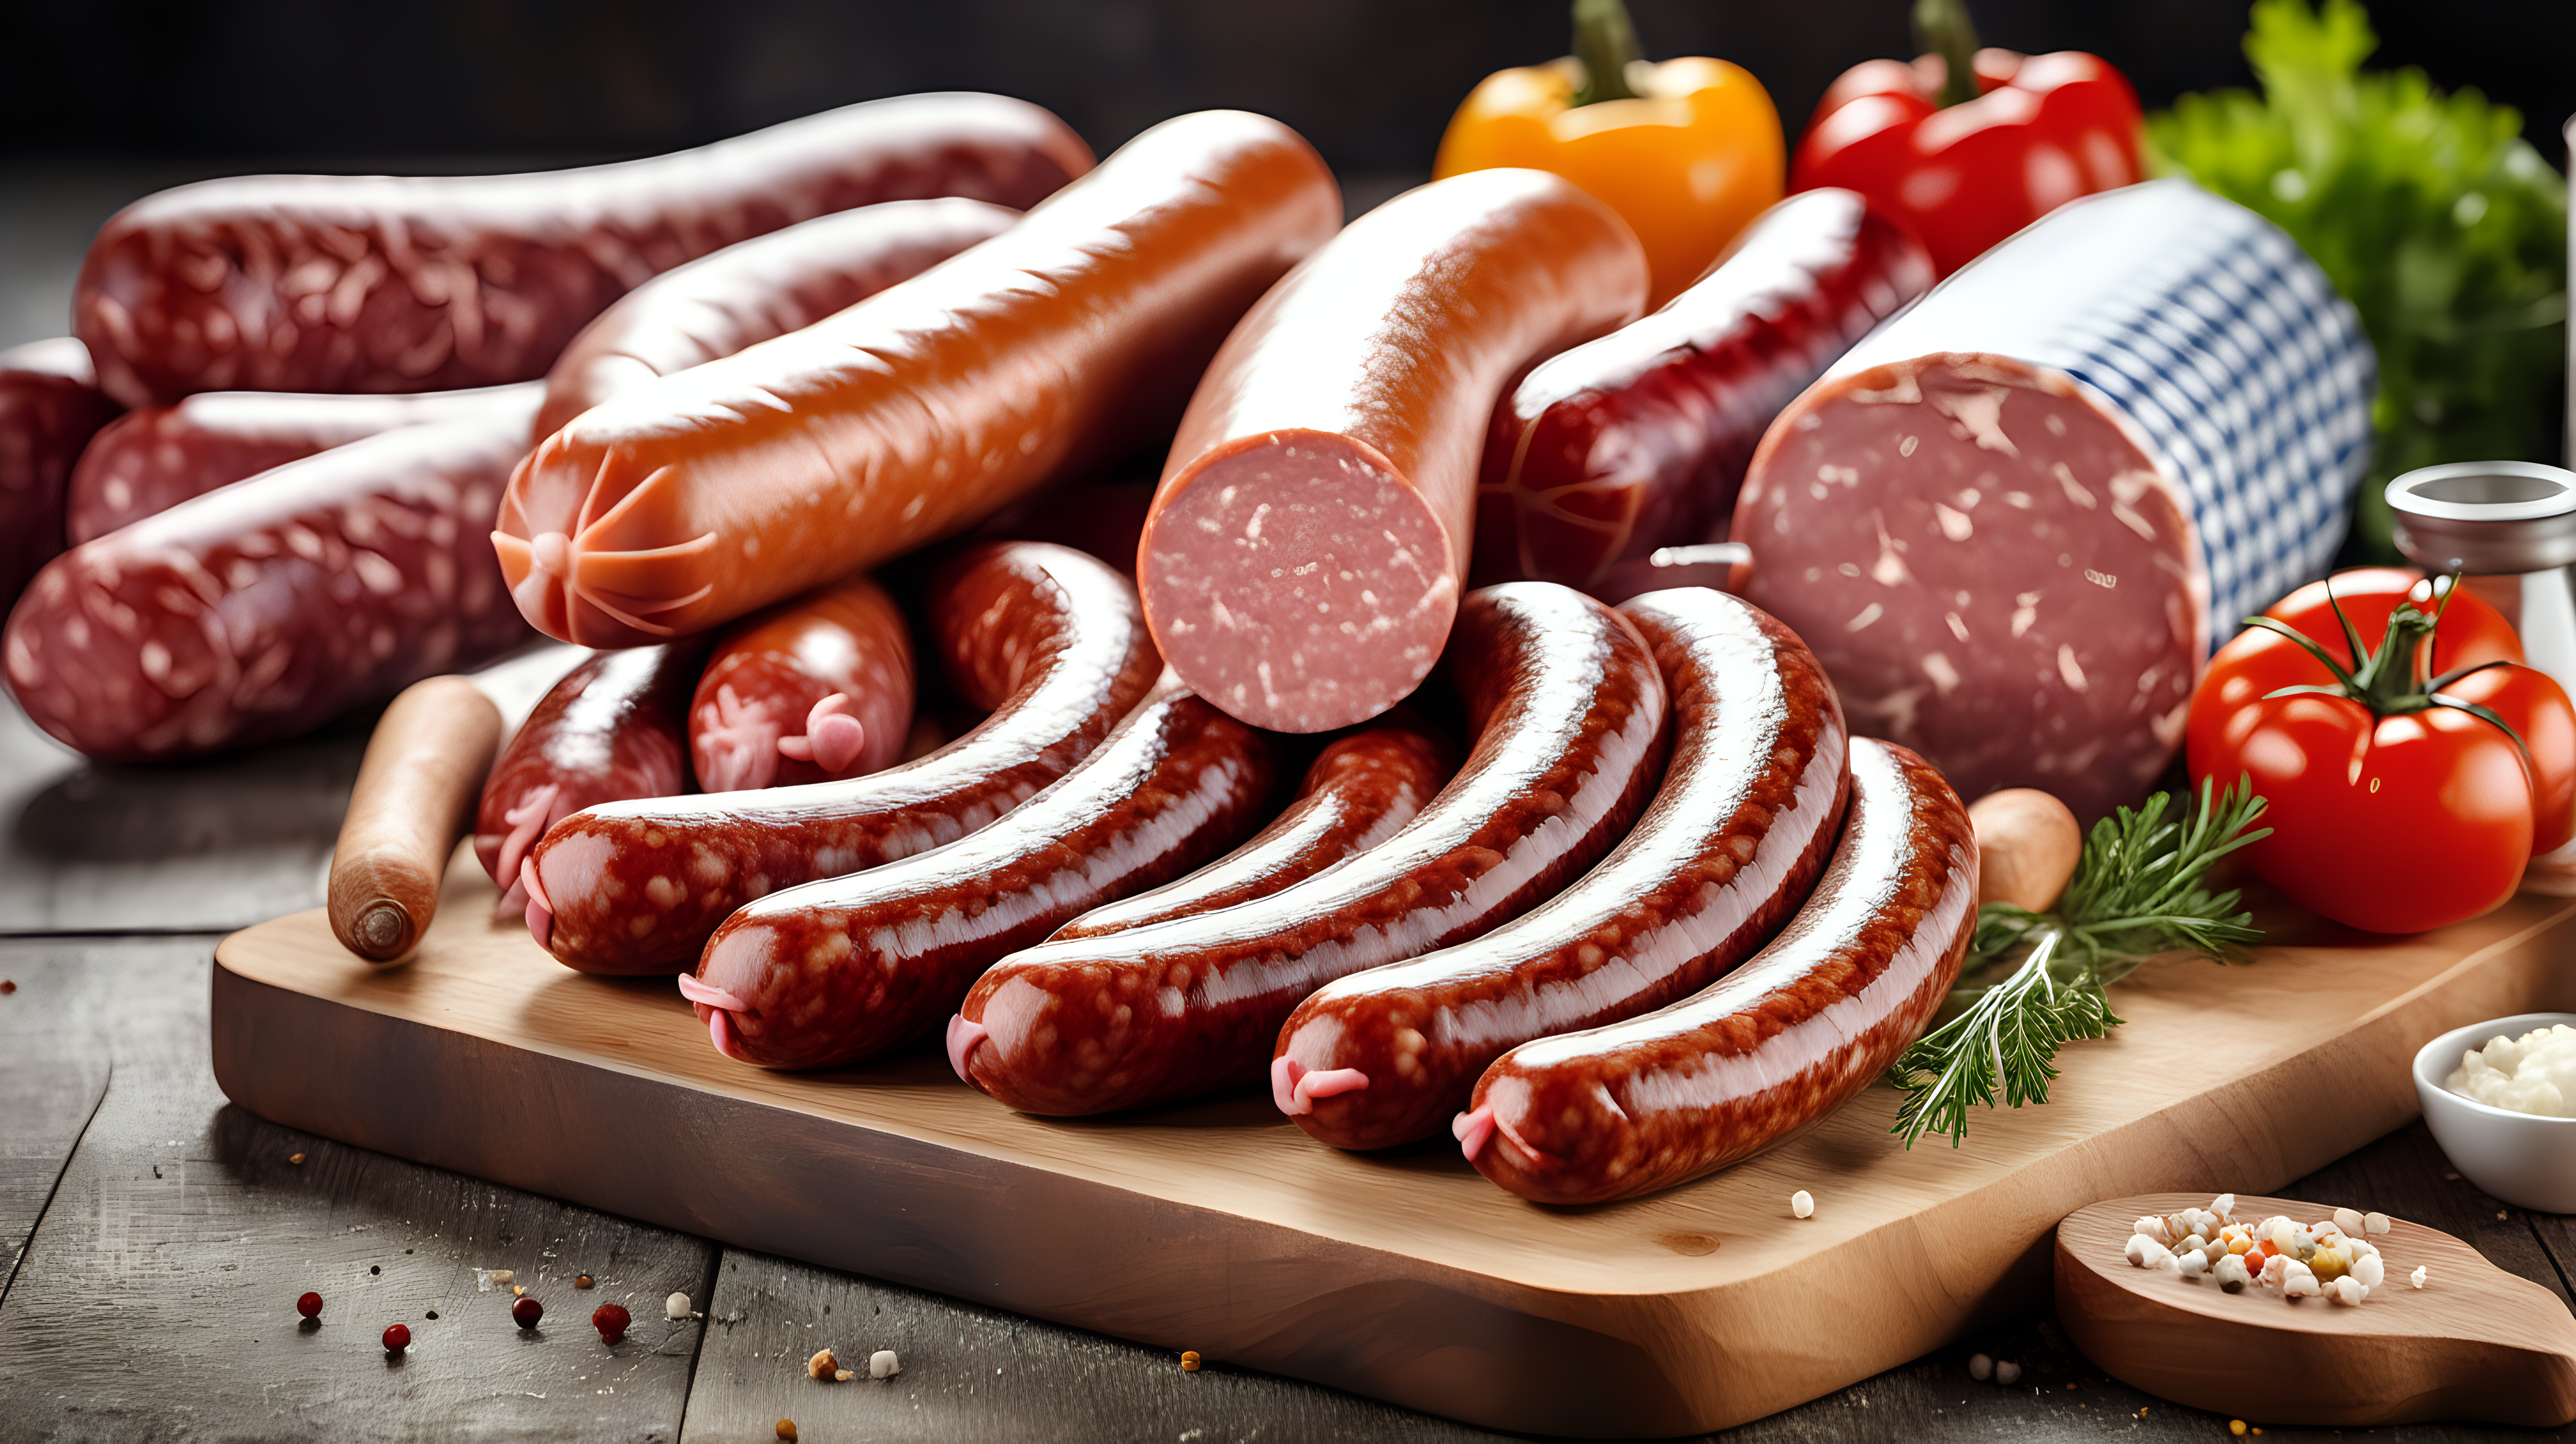 Variety of sausage products on cutting board, copy space